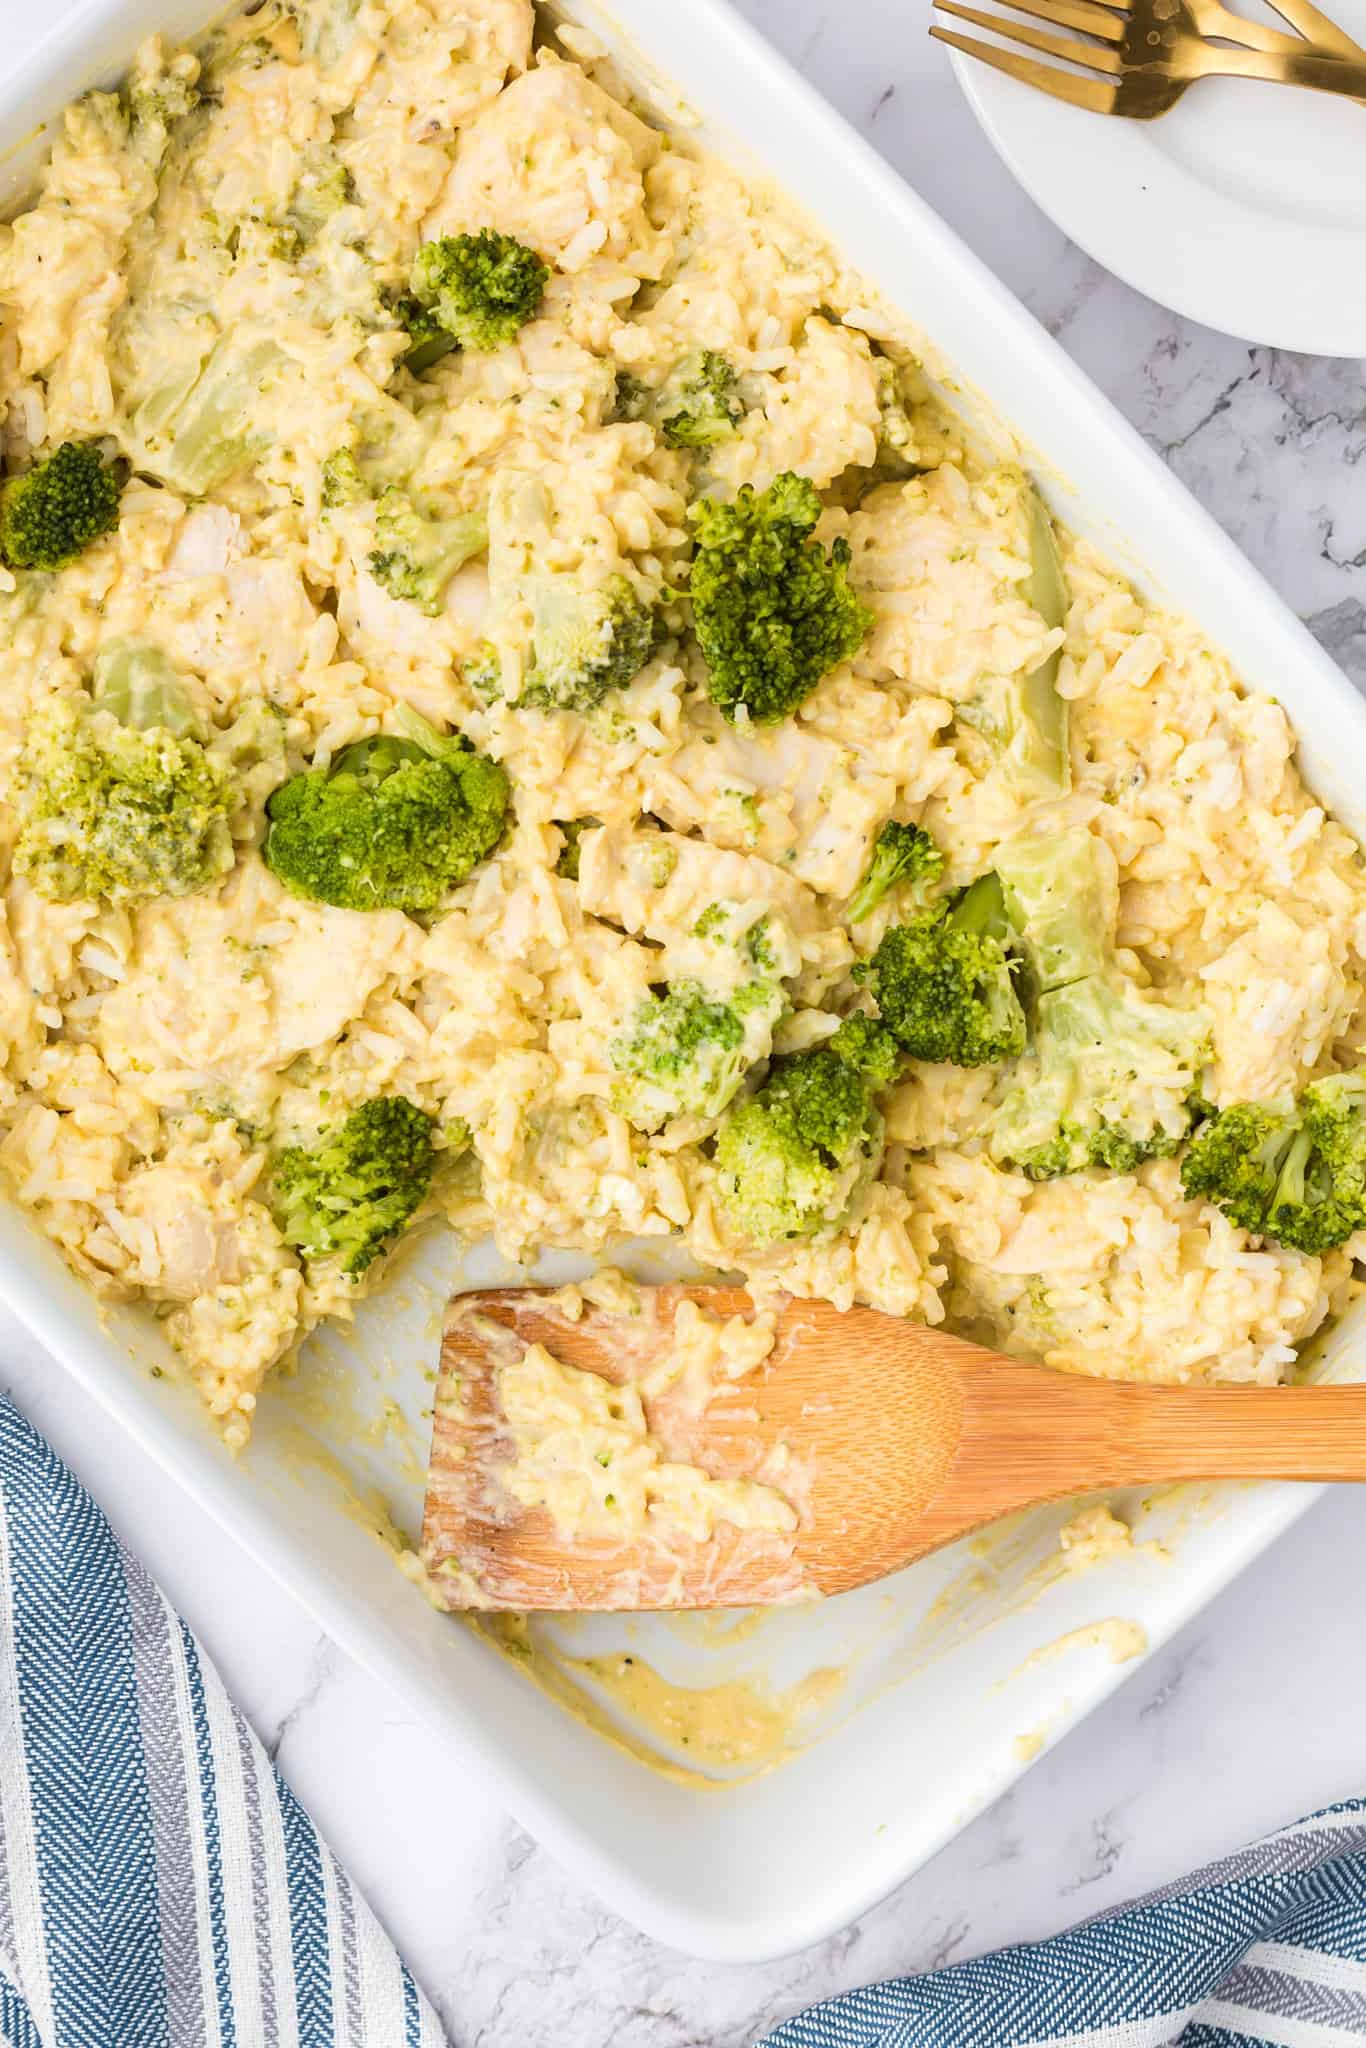 Chicken Broccoli Rice Casserole is an easy chicken dinner recipe made with chicken breasts, cream of broccoli soup, broccoli florets, white rice, cream cheese, sour cream Velveeta and shredded Colby jack cheese.